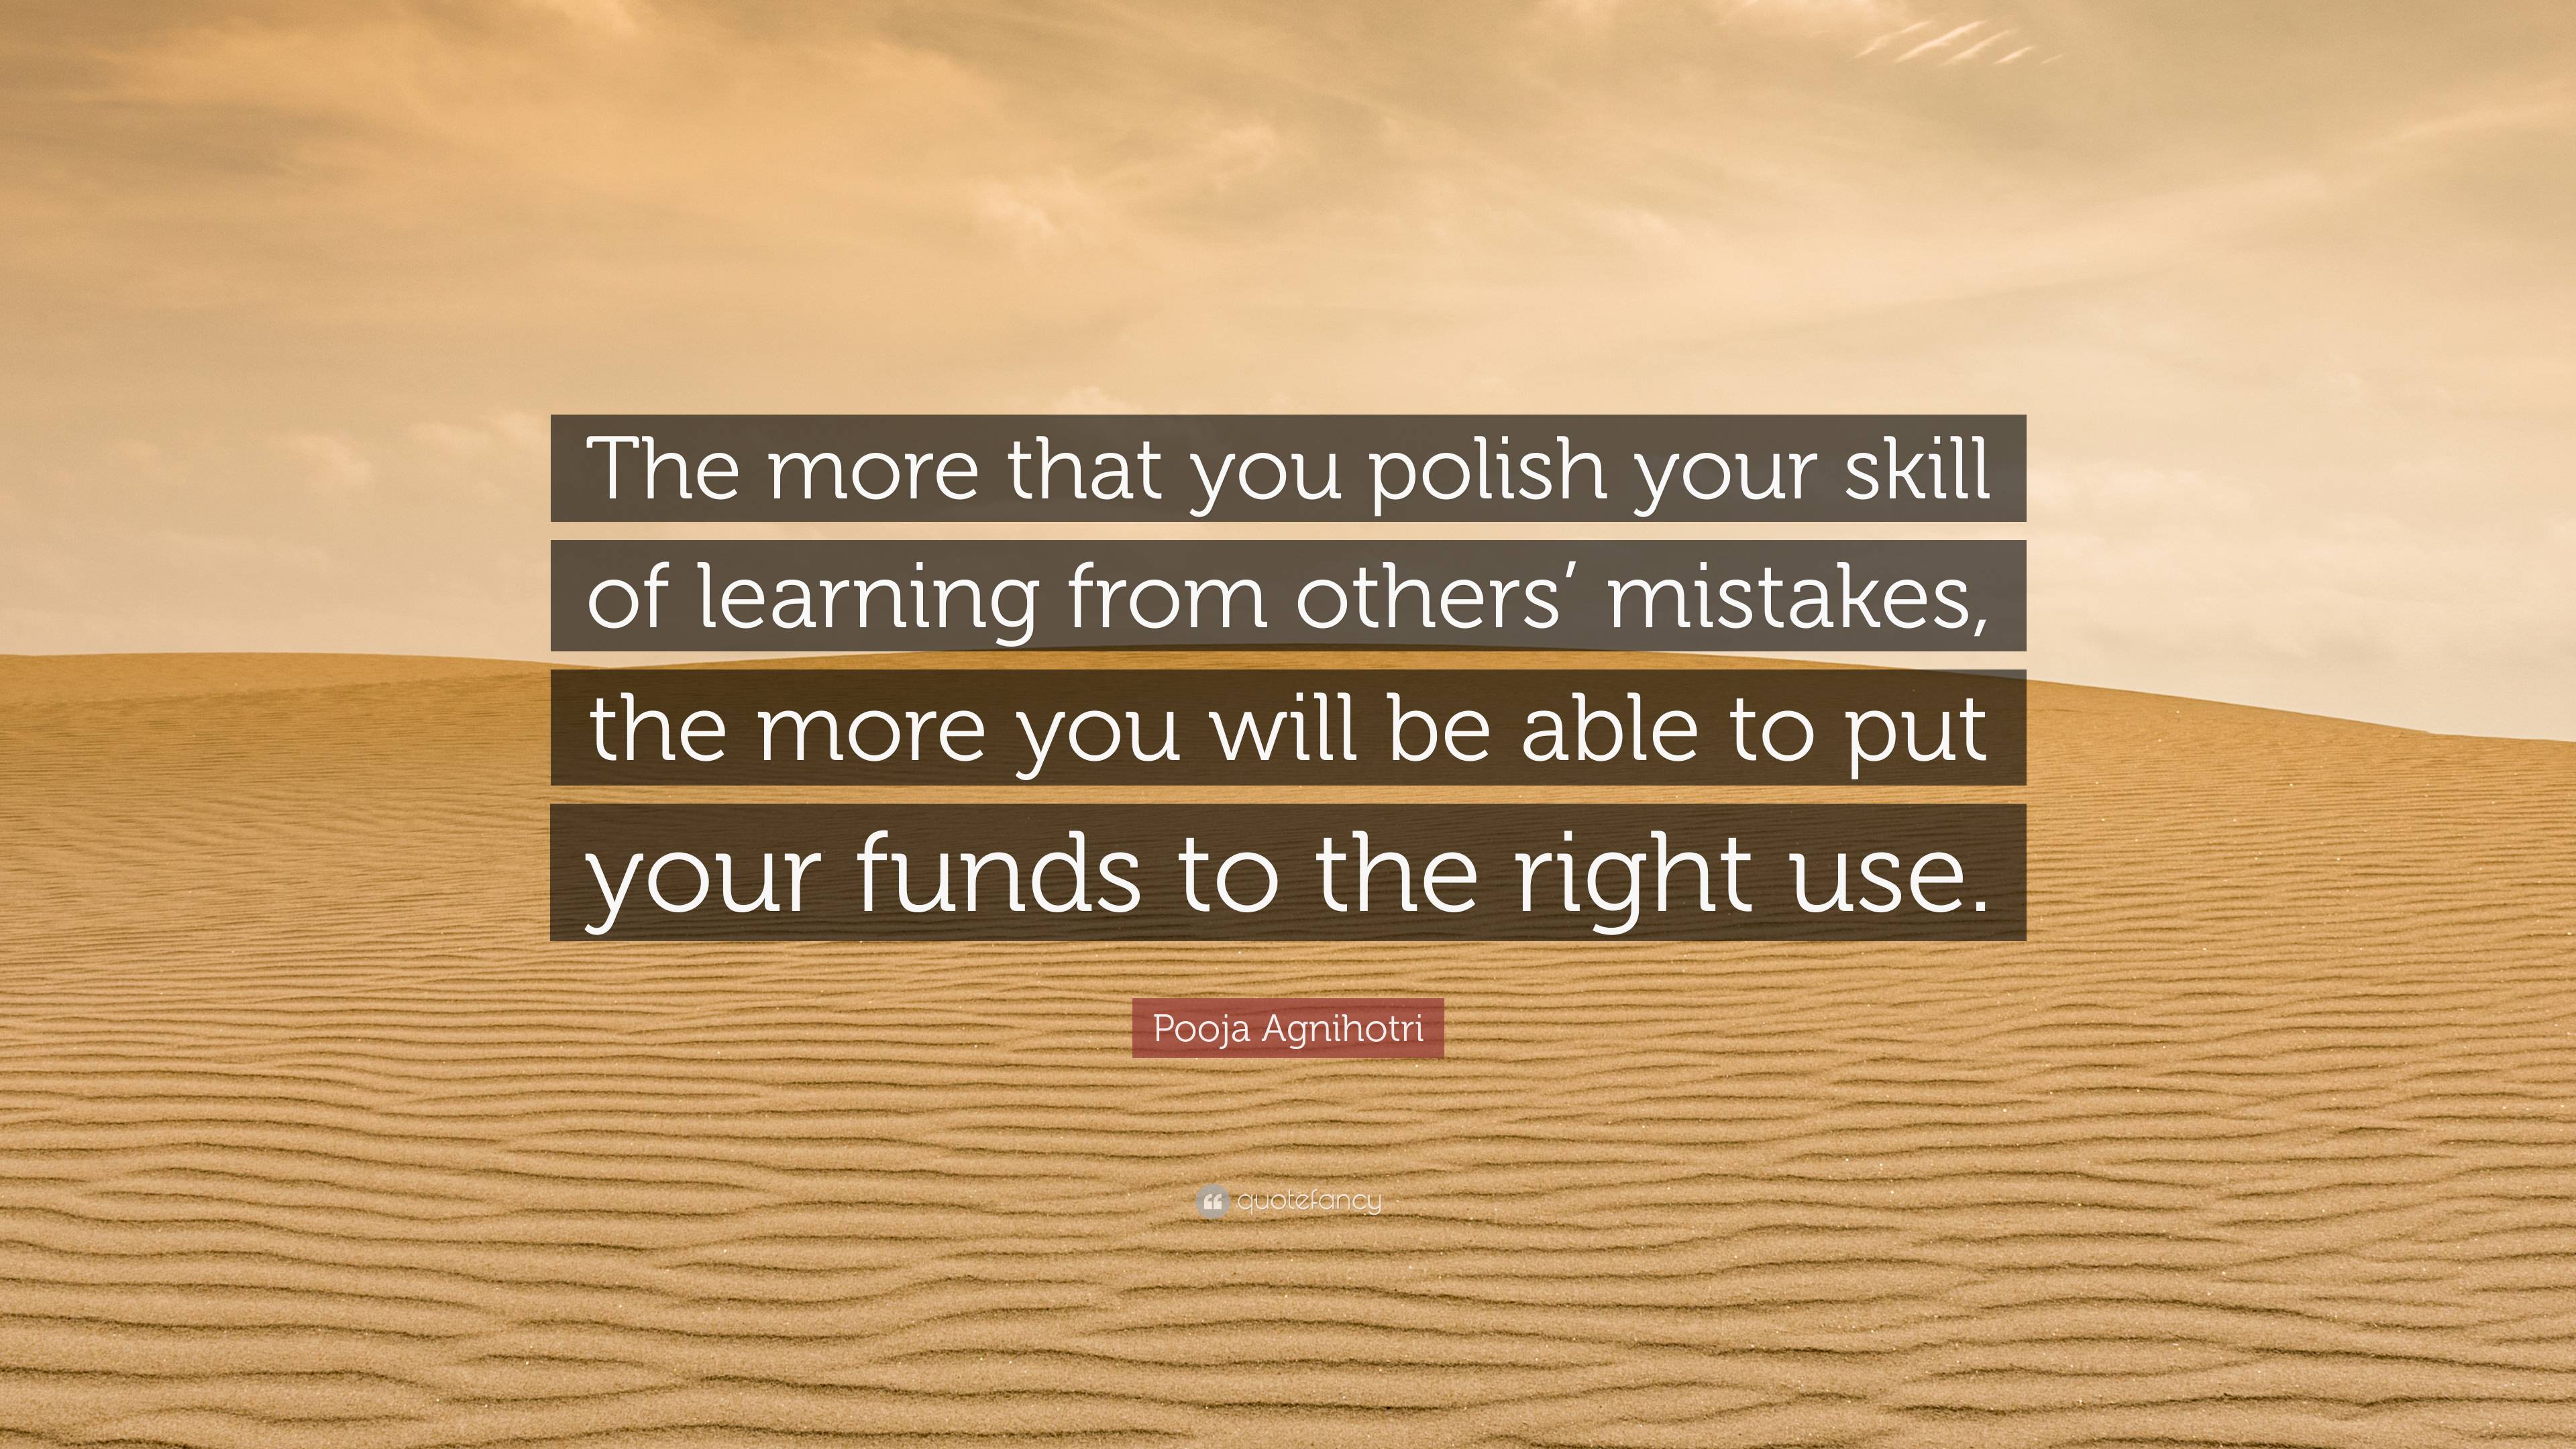 Pooja Agnihotri Quote: “The more that you polish your skill of learning ...